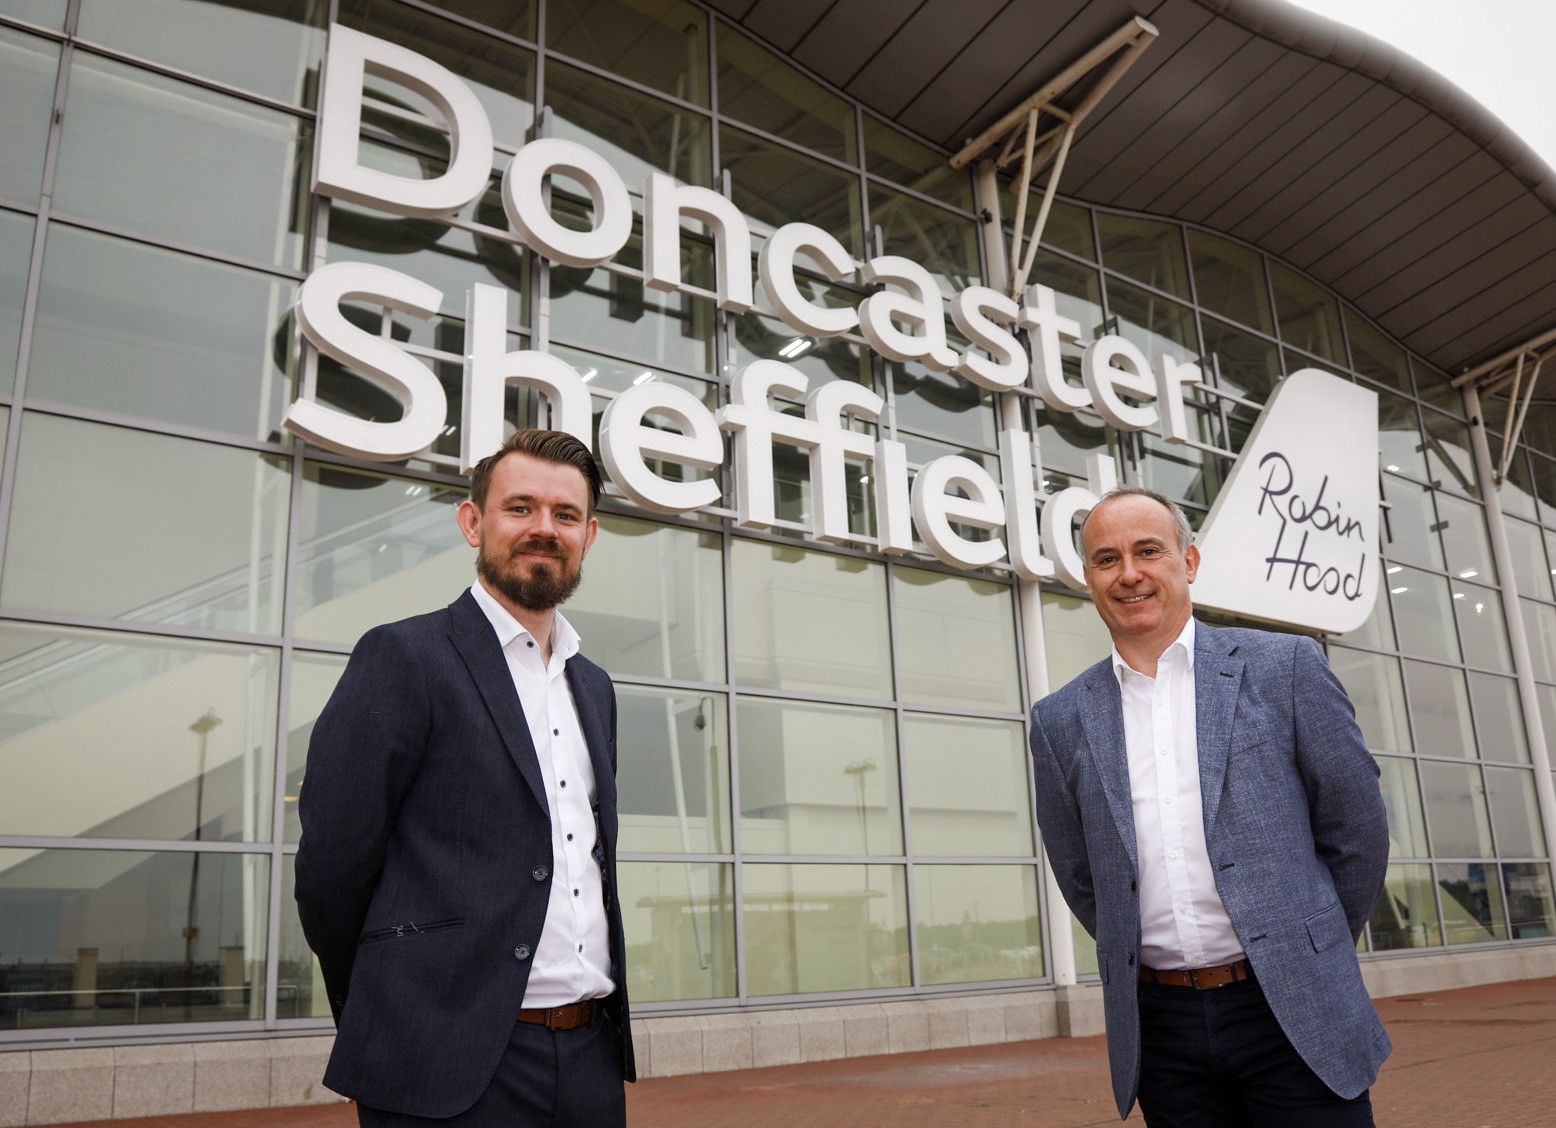 Wizz Air base at Doncaster Sheffield Airport Provides Catalyst for Expansion and Economic Growth